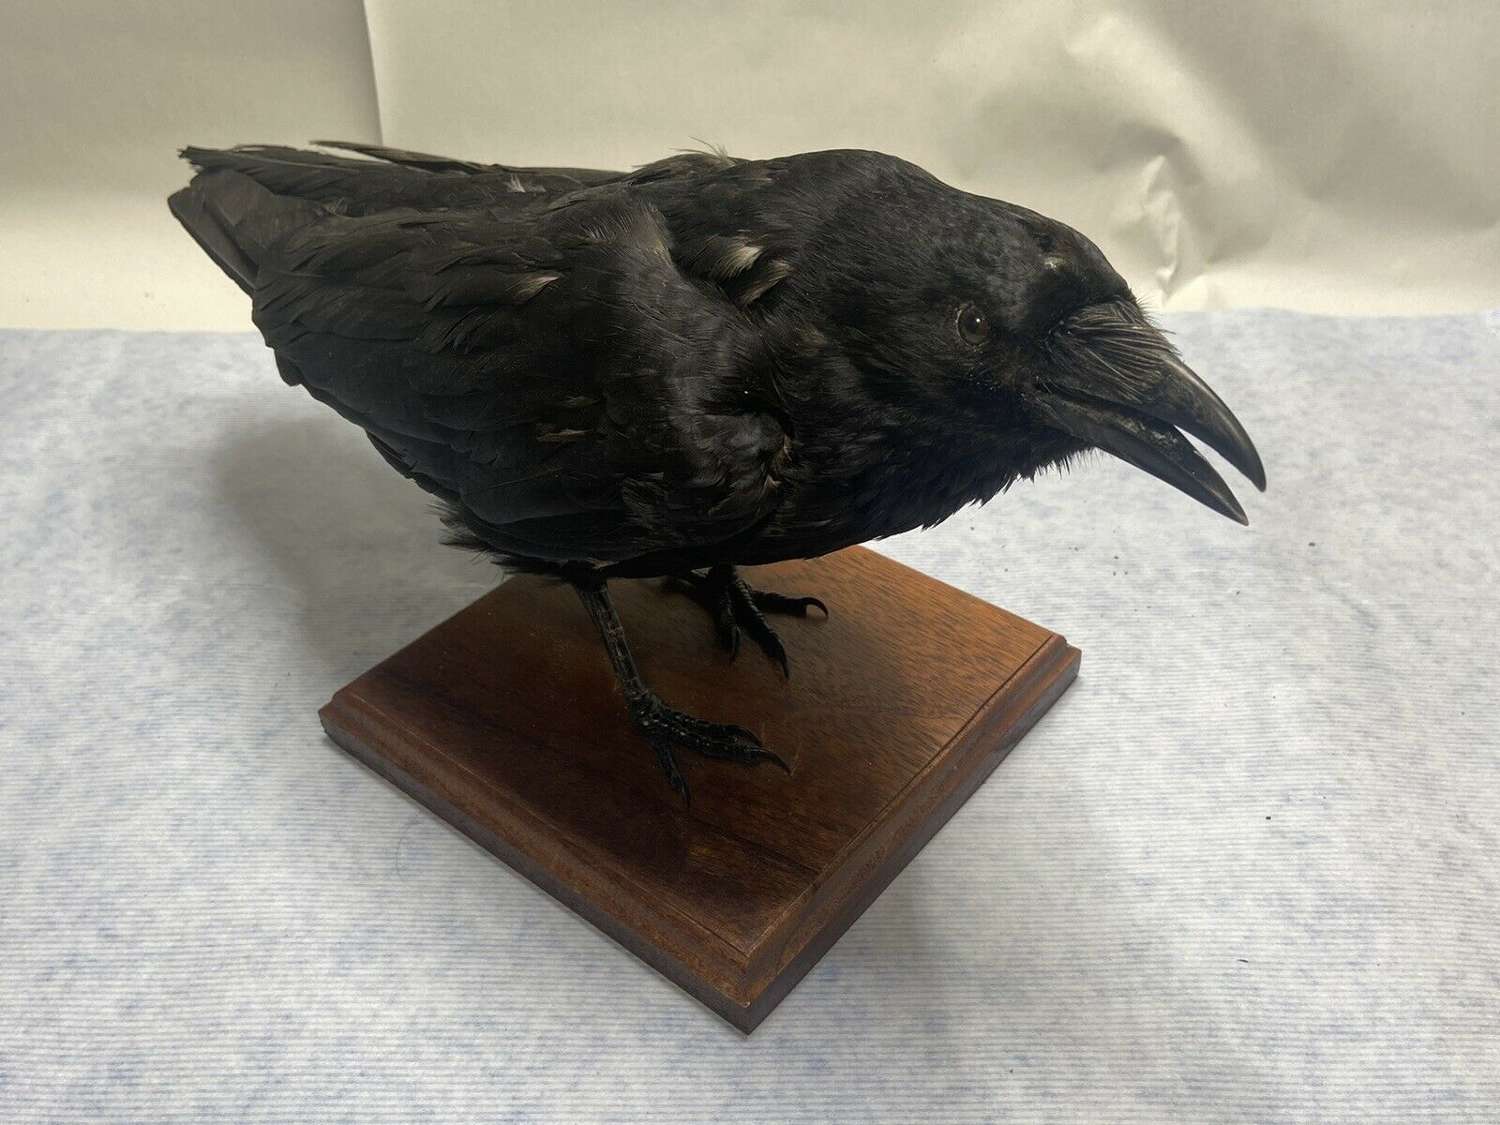 Mounted Taxidermy Game Of Thrones Super Natural 3 Eyed Crow Branden